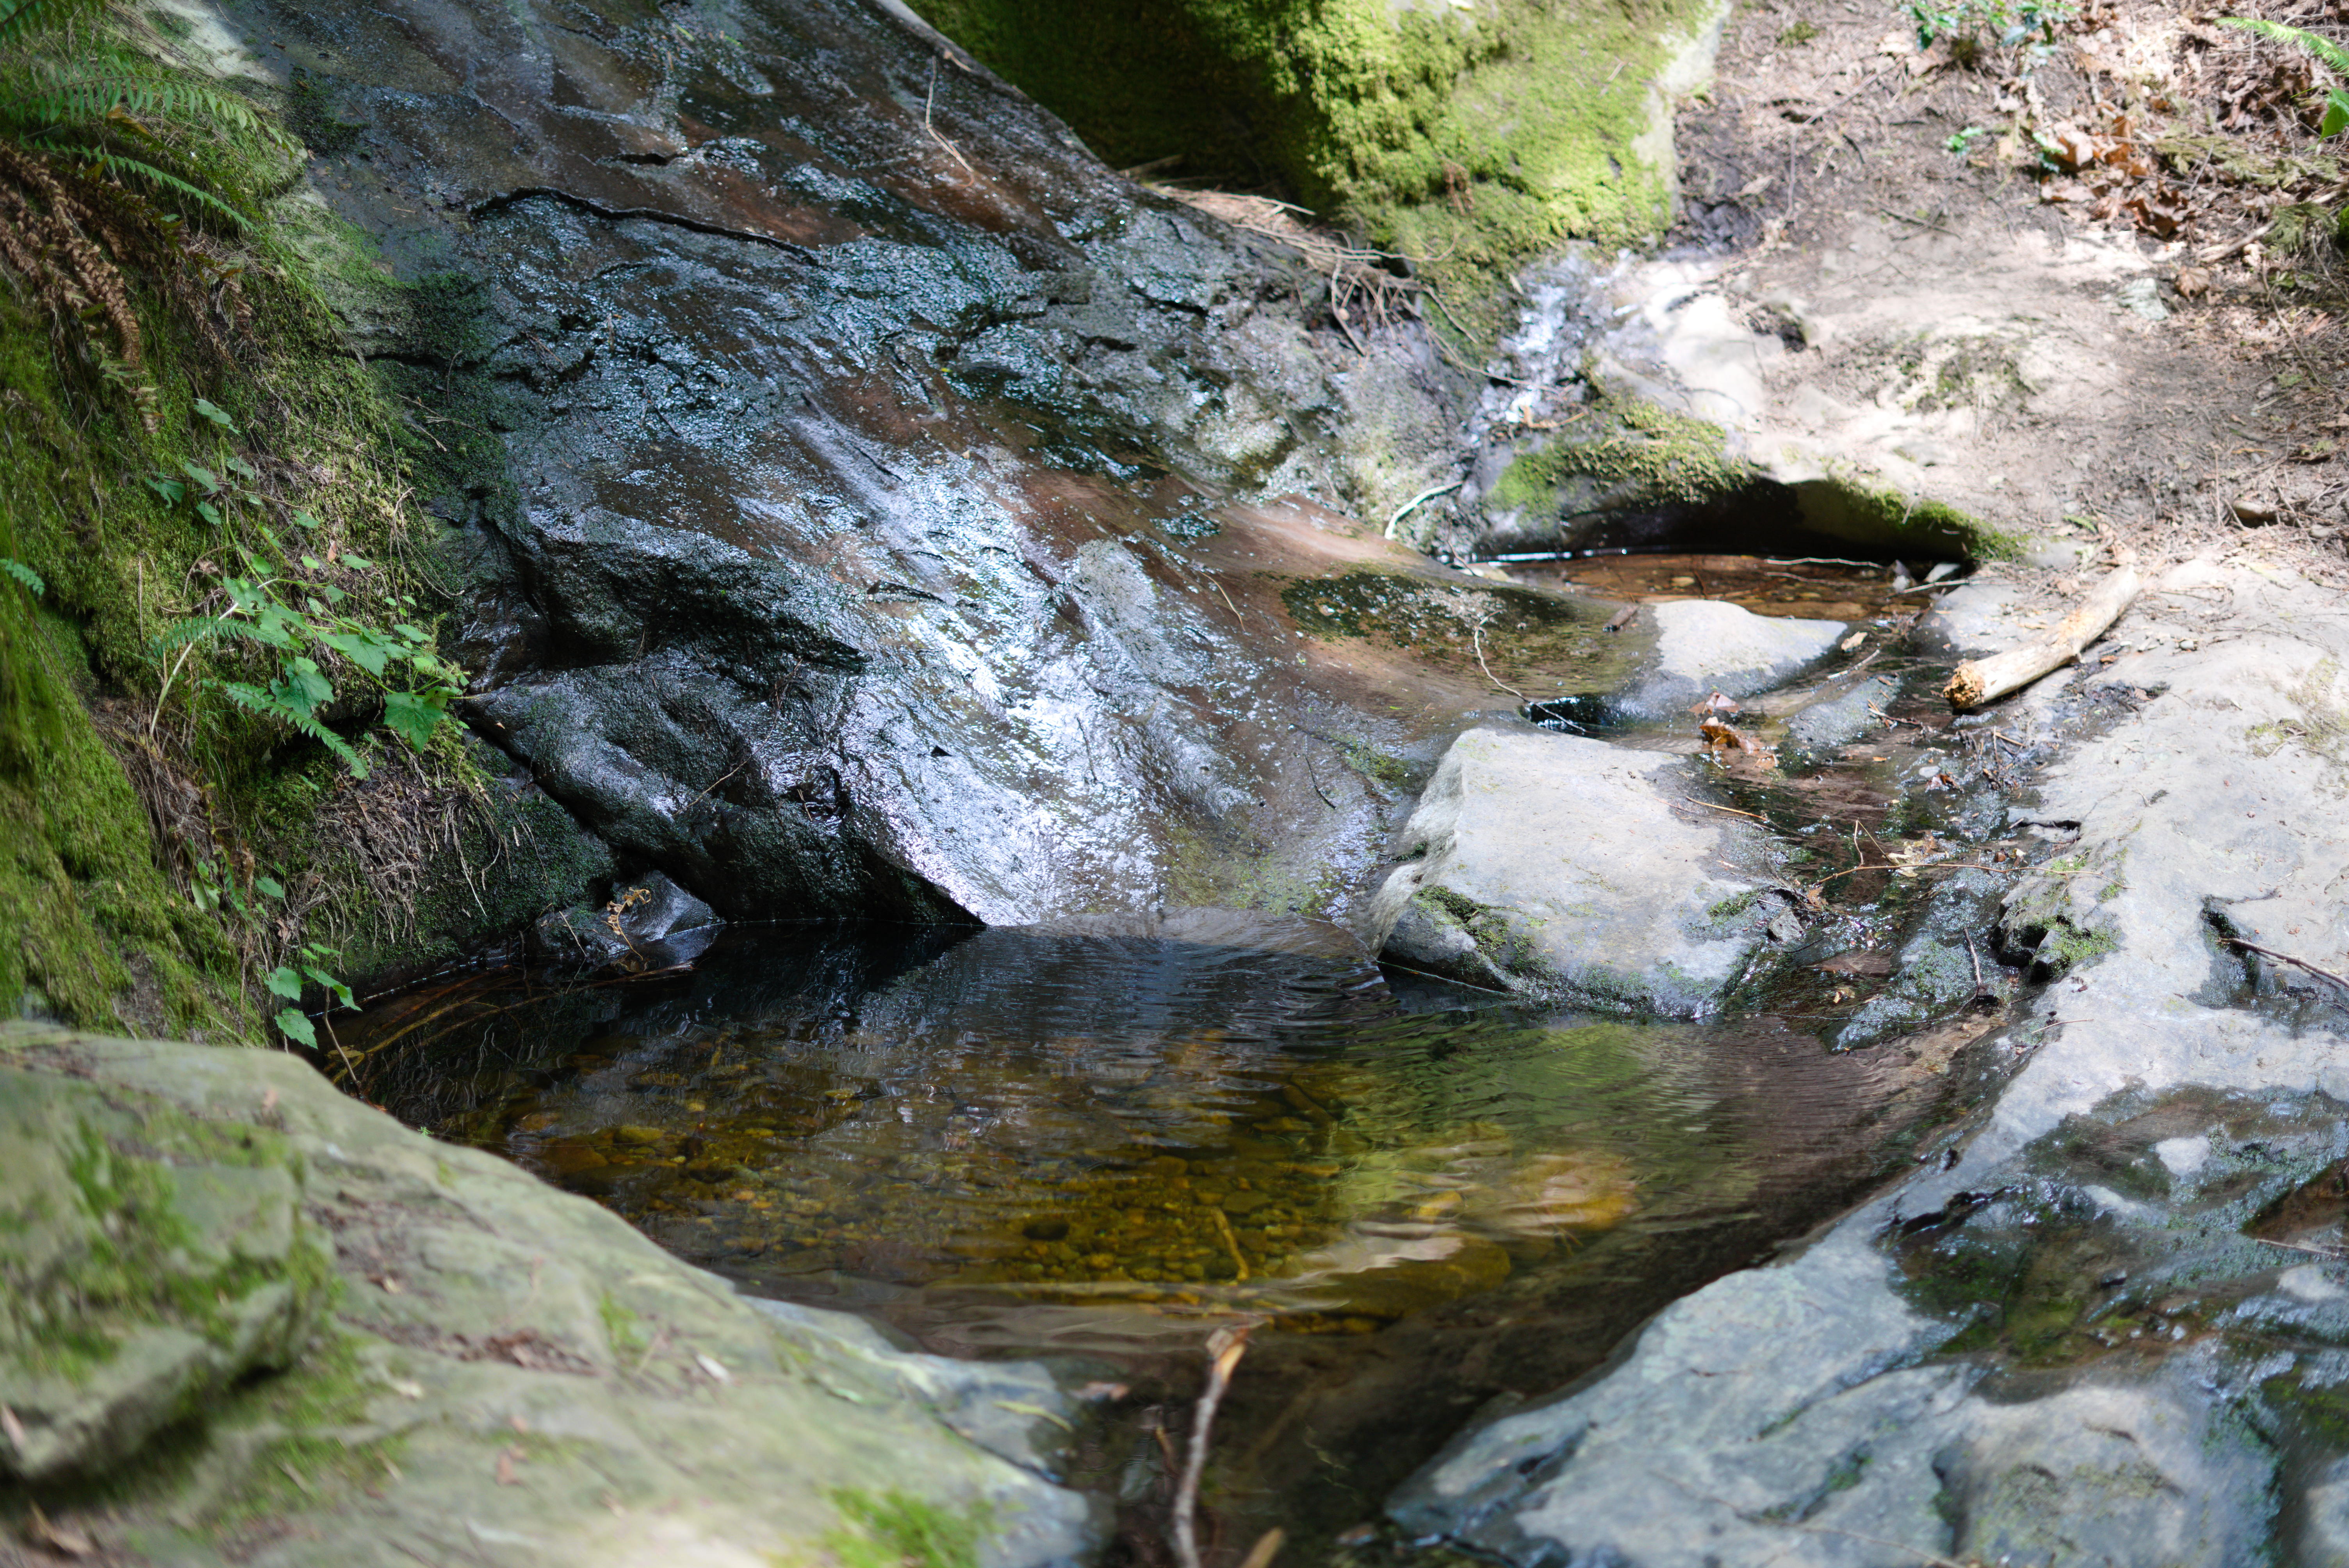 a small pond formed in the stream